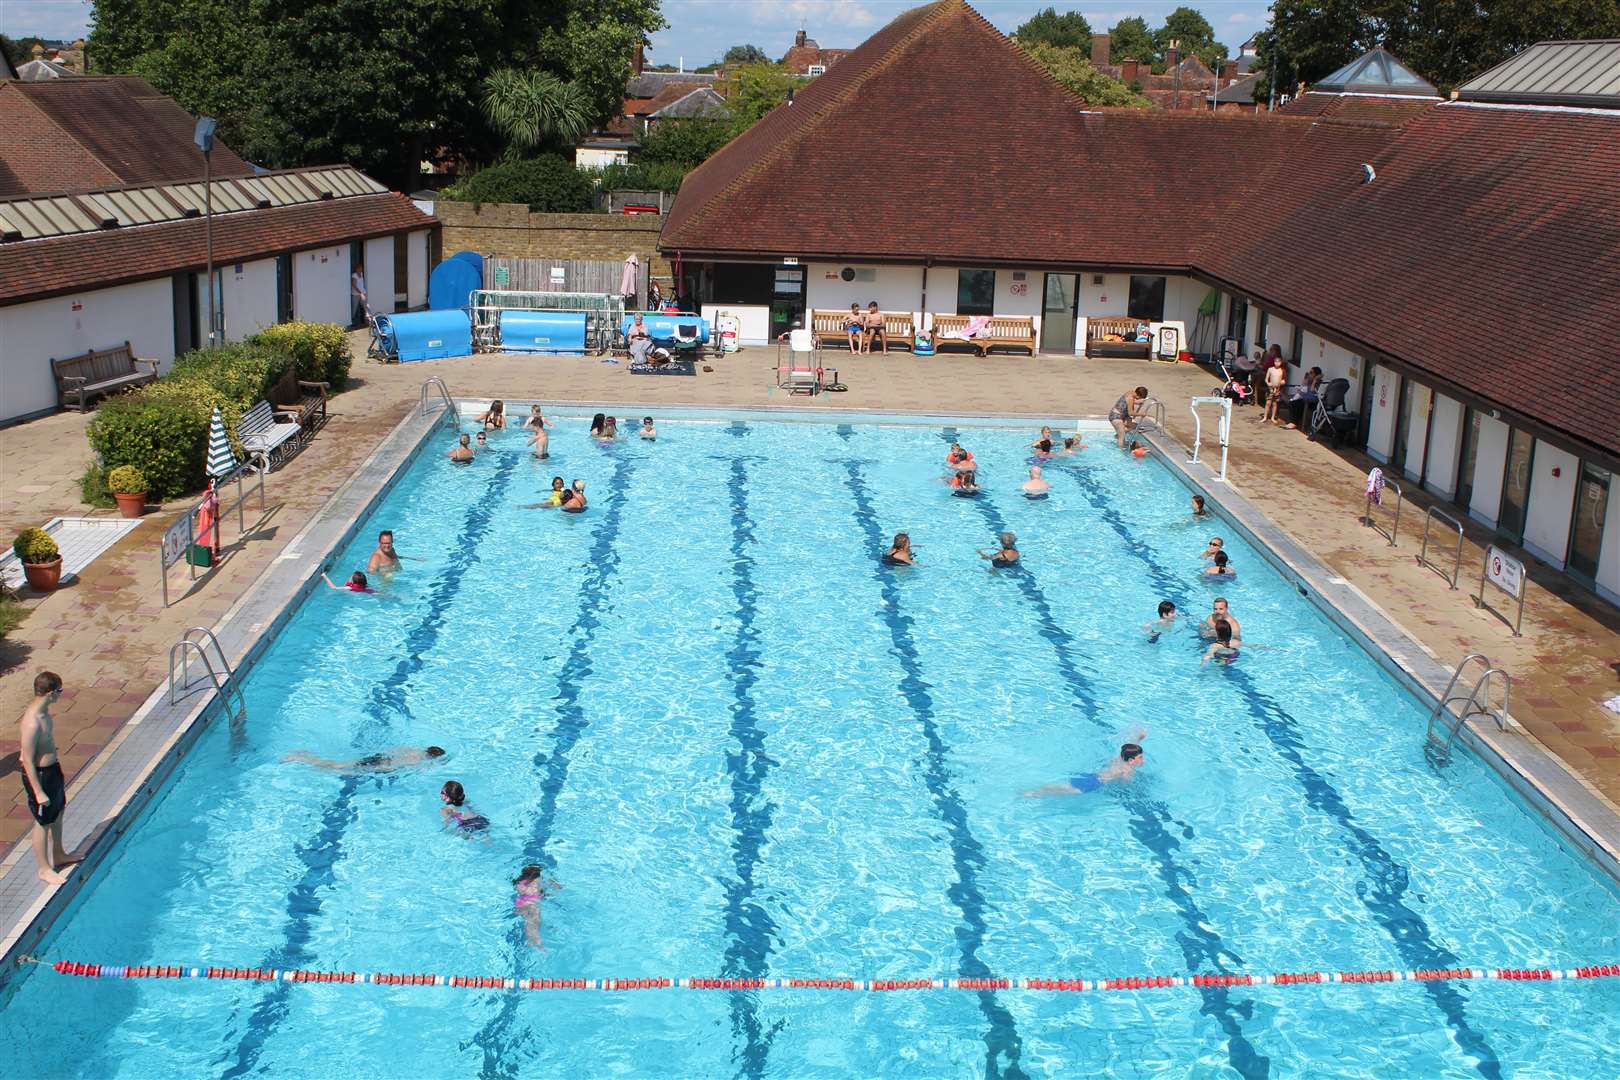 From July 11, outdoor swimming pools and water parks can reopen. Picture: Poppy Boorman/Faversham Pools